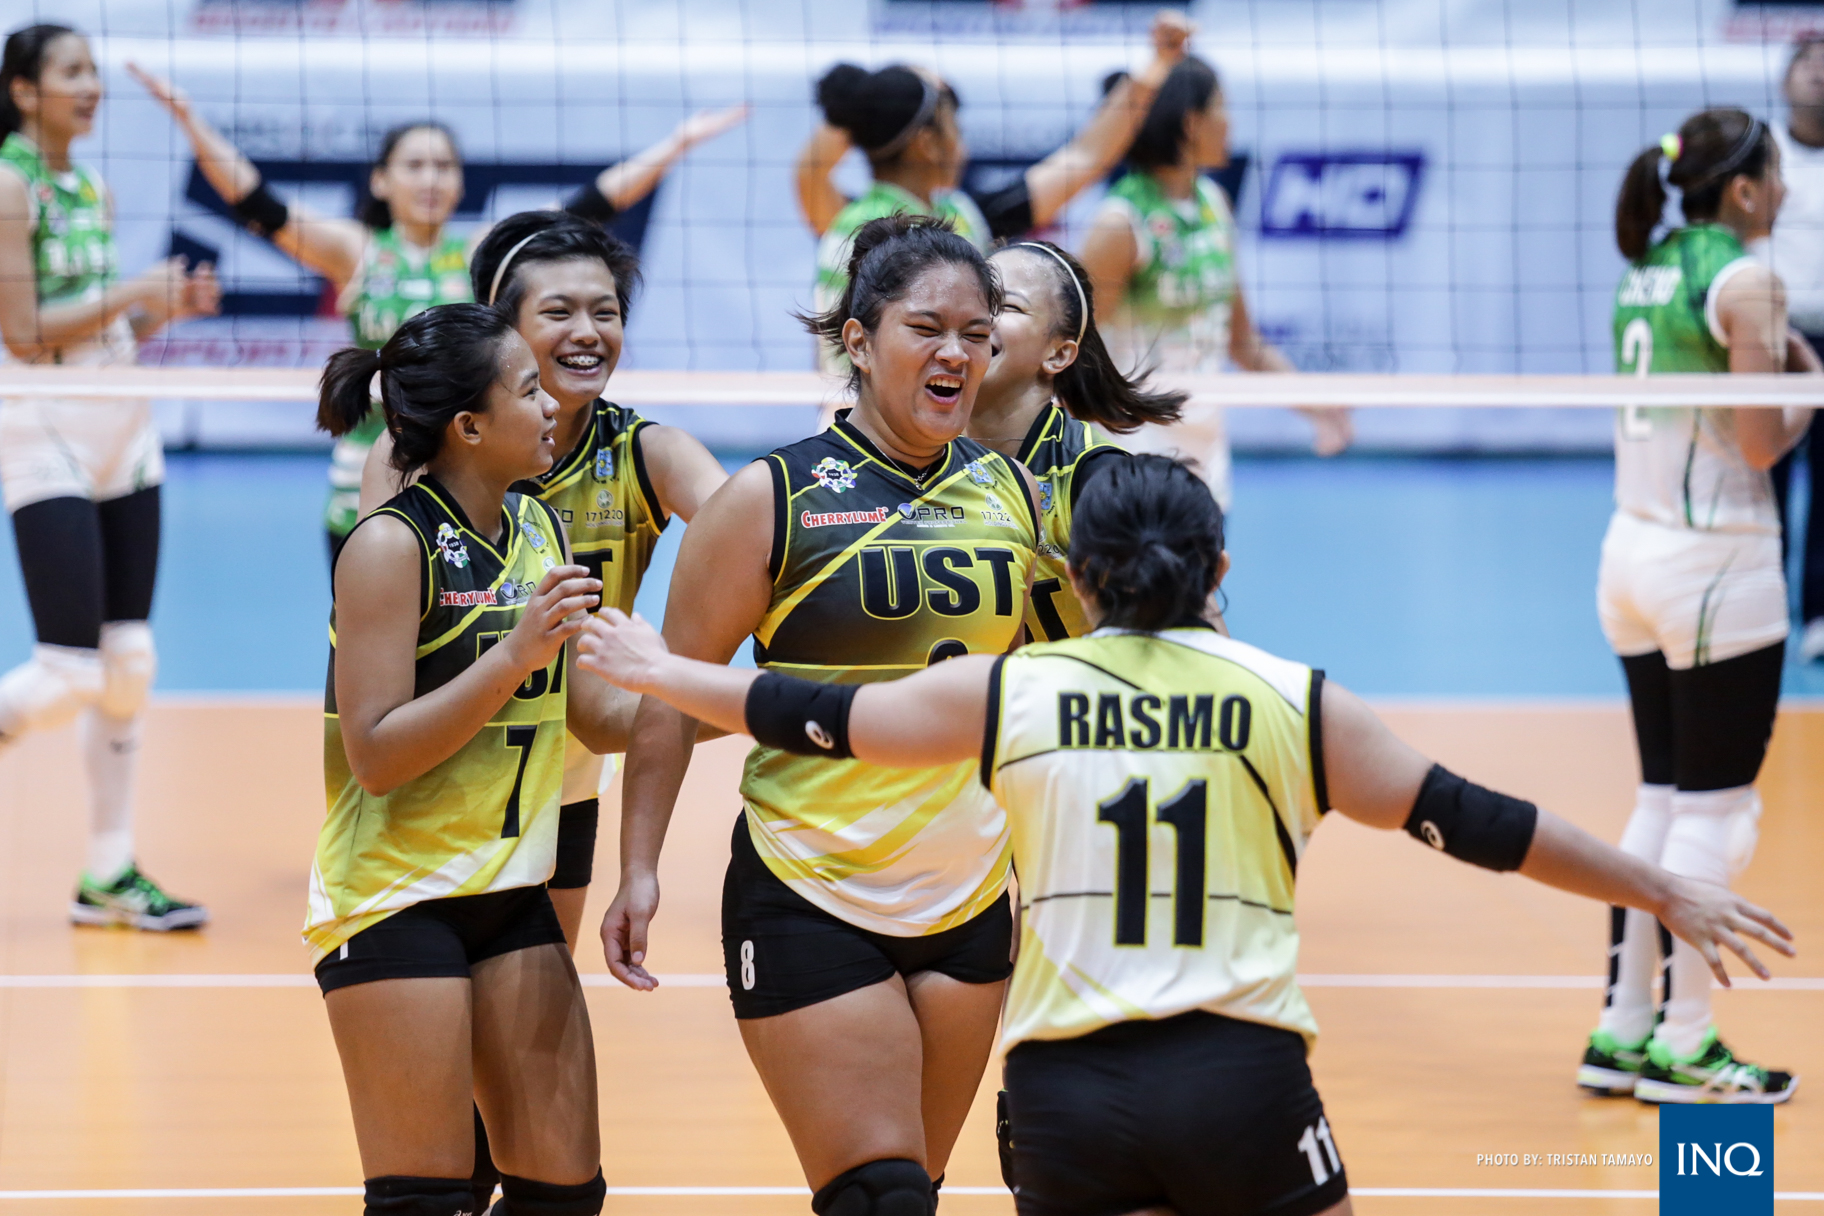 UST's Dimdim Pacres. Photo by Tristan Tamayo/INQUIRER.net